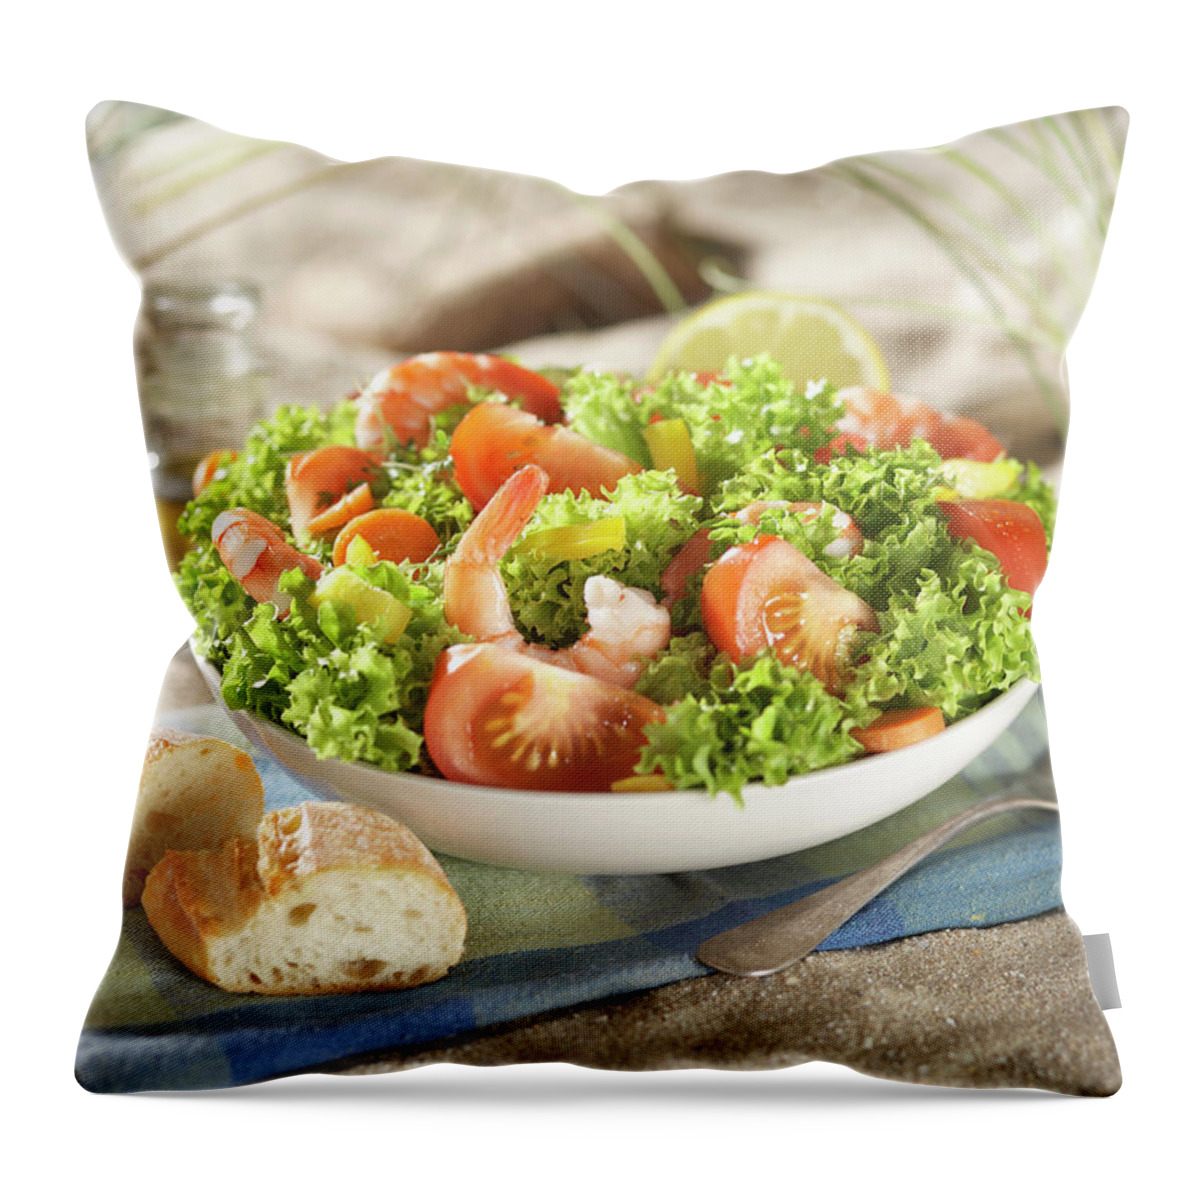 Grass Throw Pillow featuring the photograph Shrimp, Vegetable And Salad In Plate by Westend61